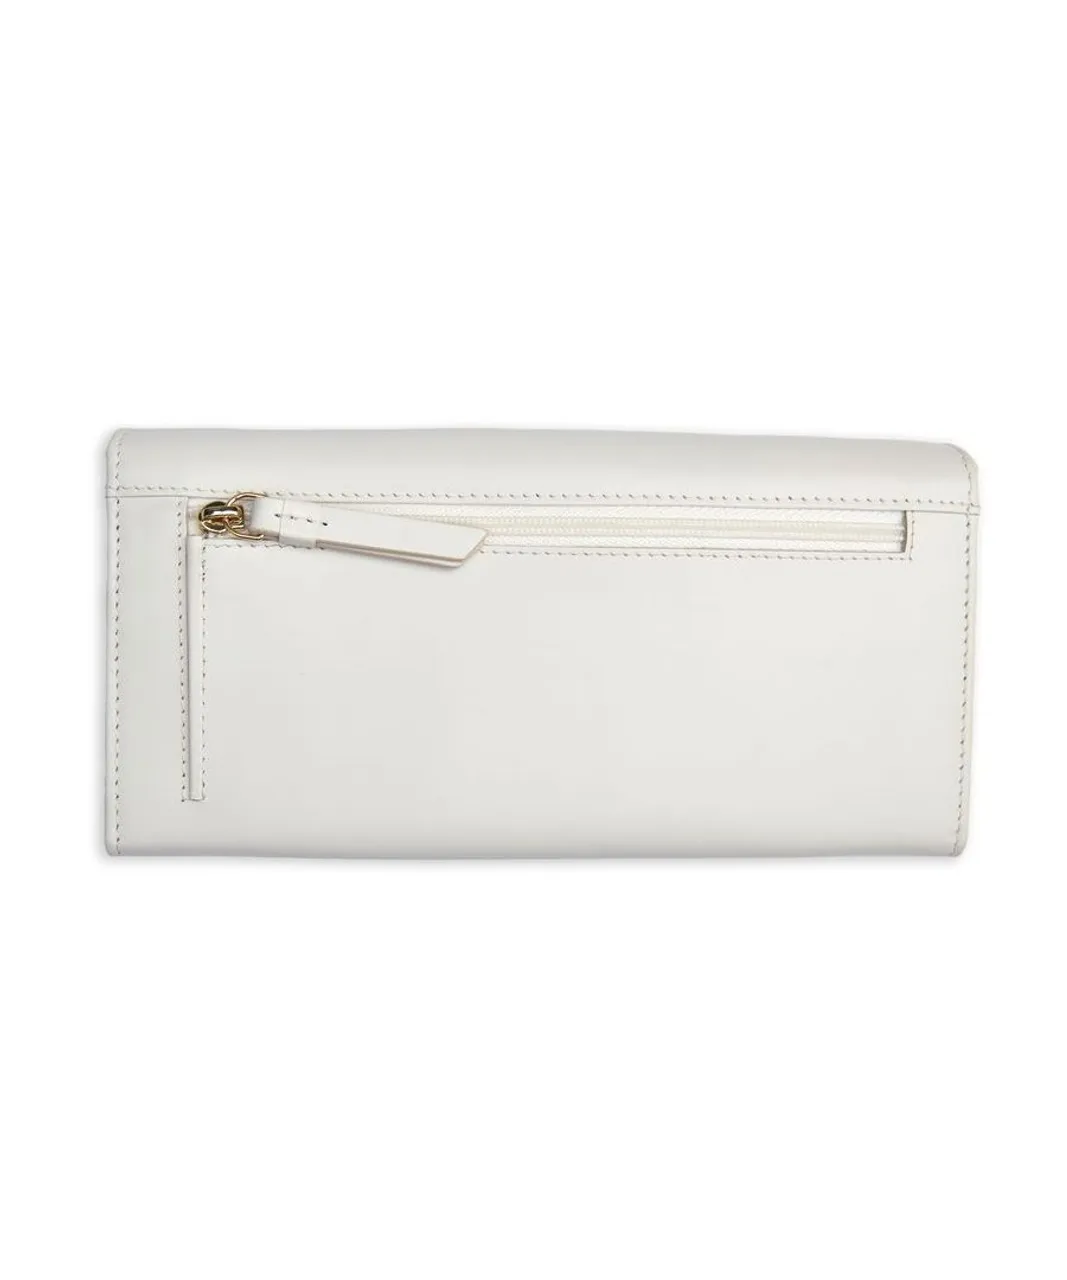 Radley Womens Room With A View Purse - White - One Size